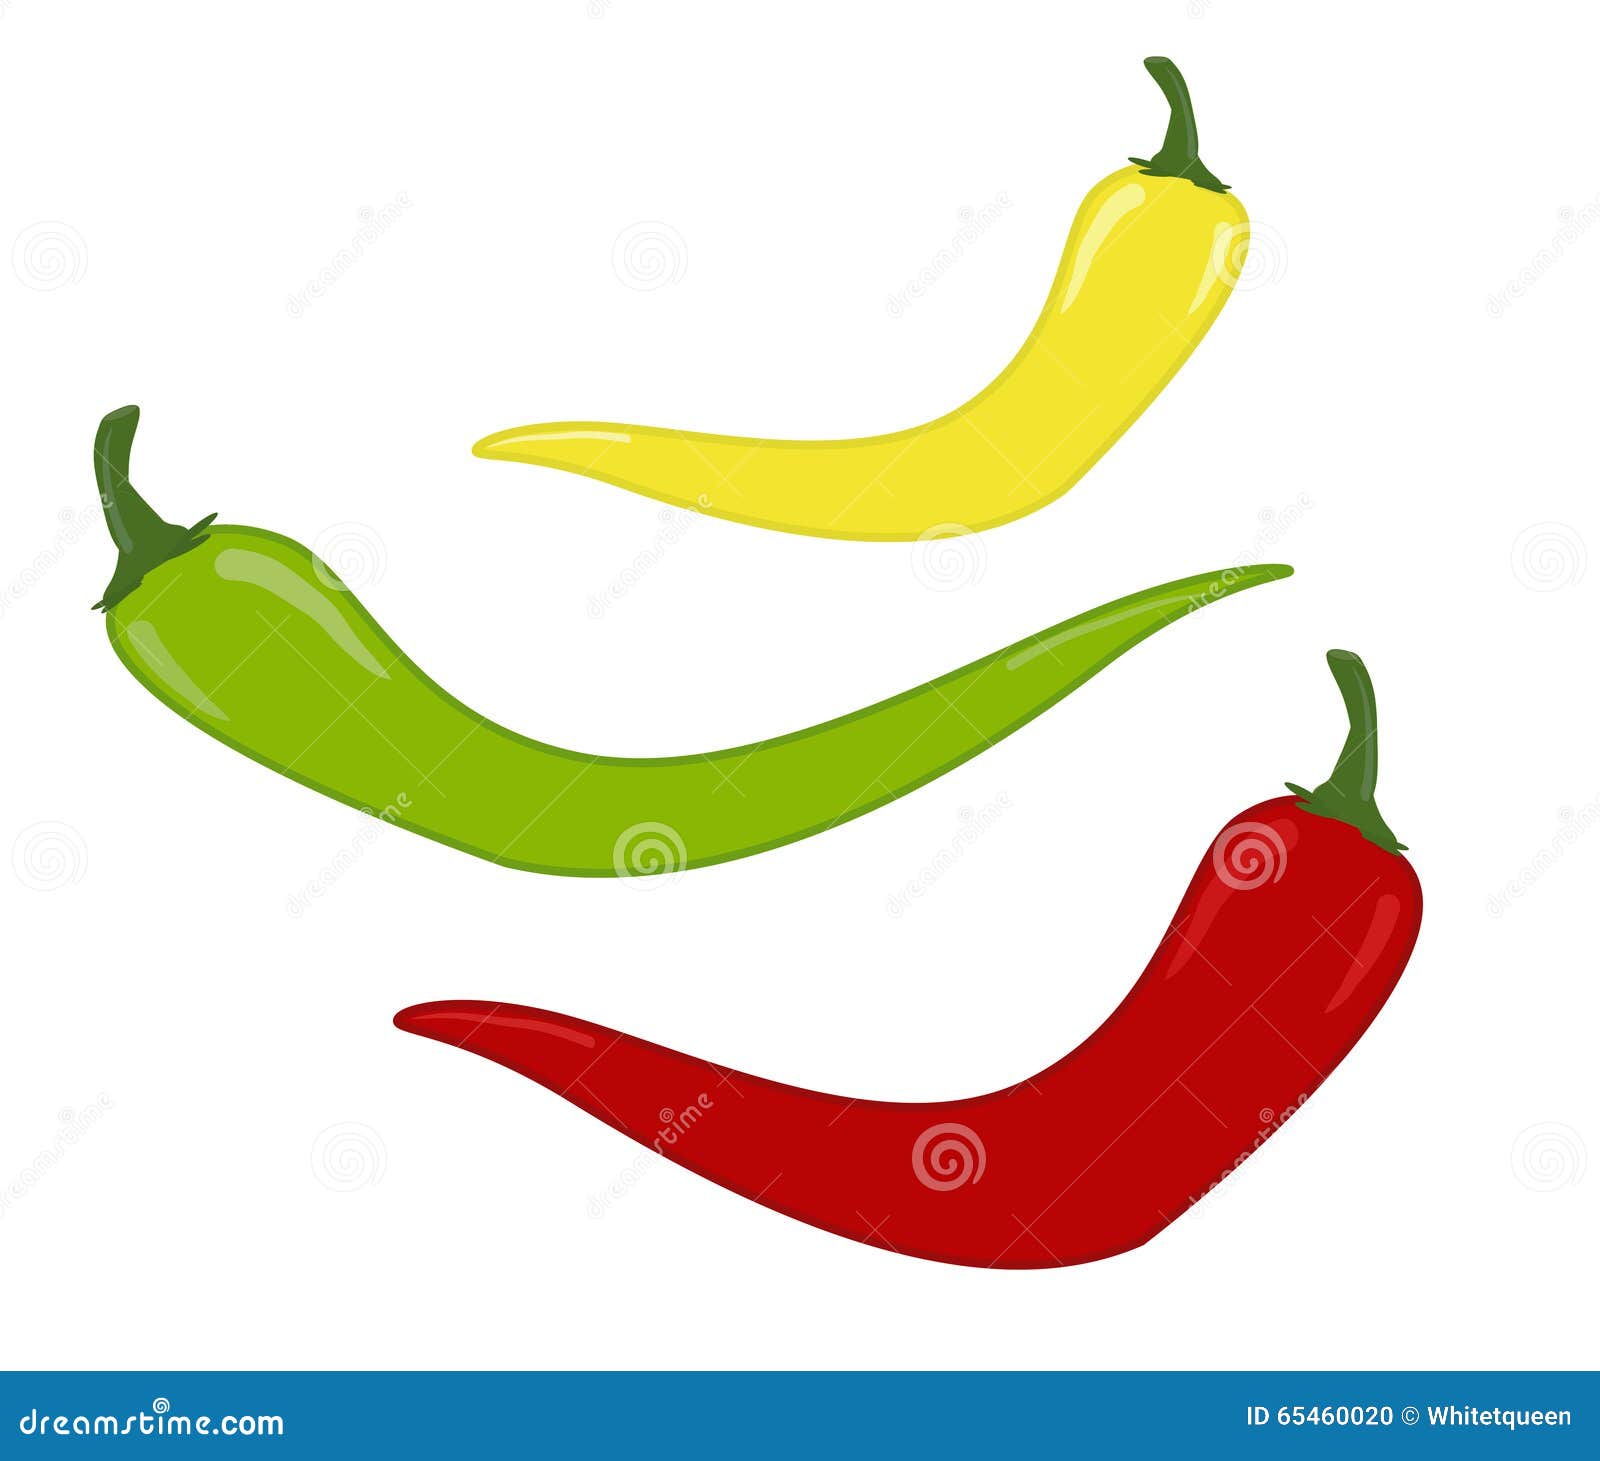 Peppers, vector. Illustration peppers in red, green and yellow done in a vector.